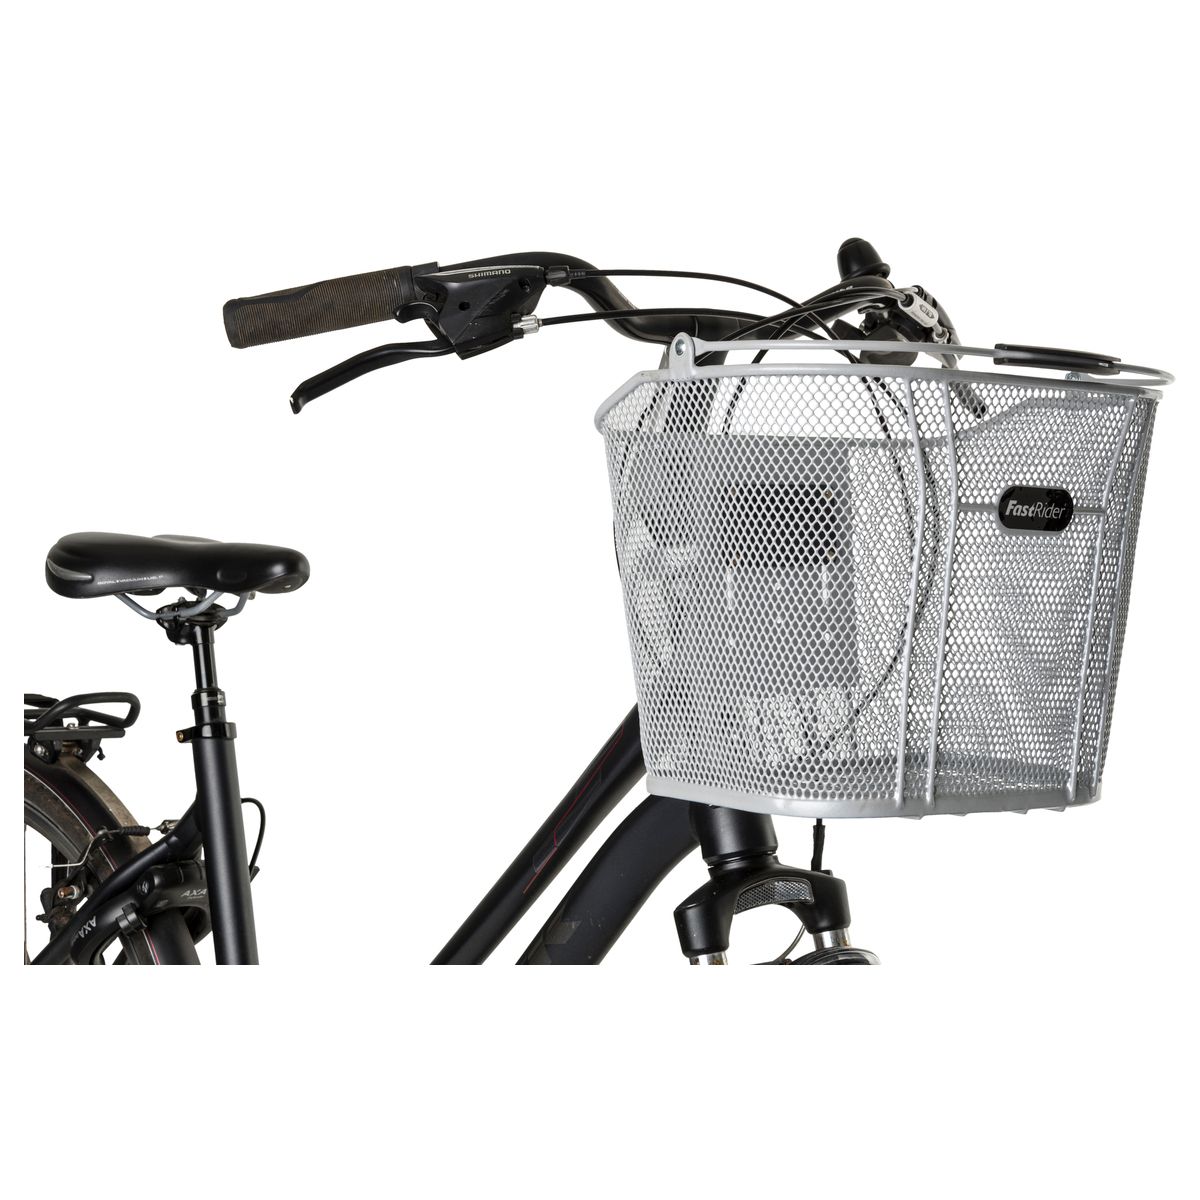 Fastrider Beemster Bicycle basket Fast Lock fit example